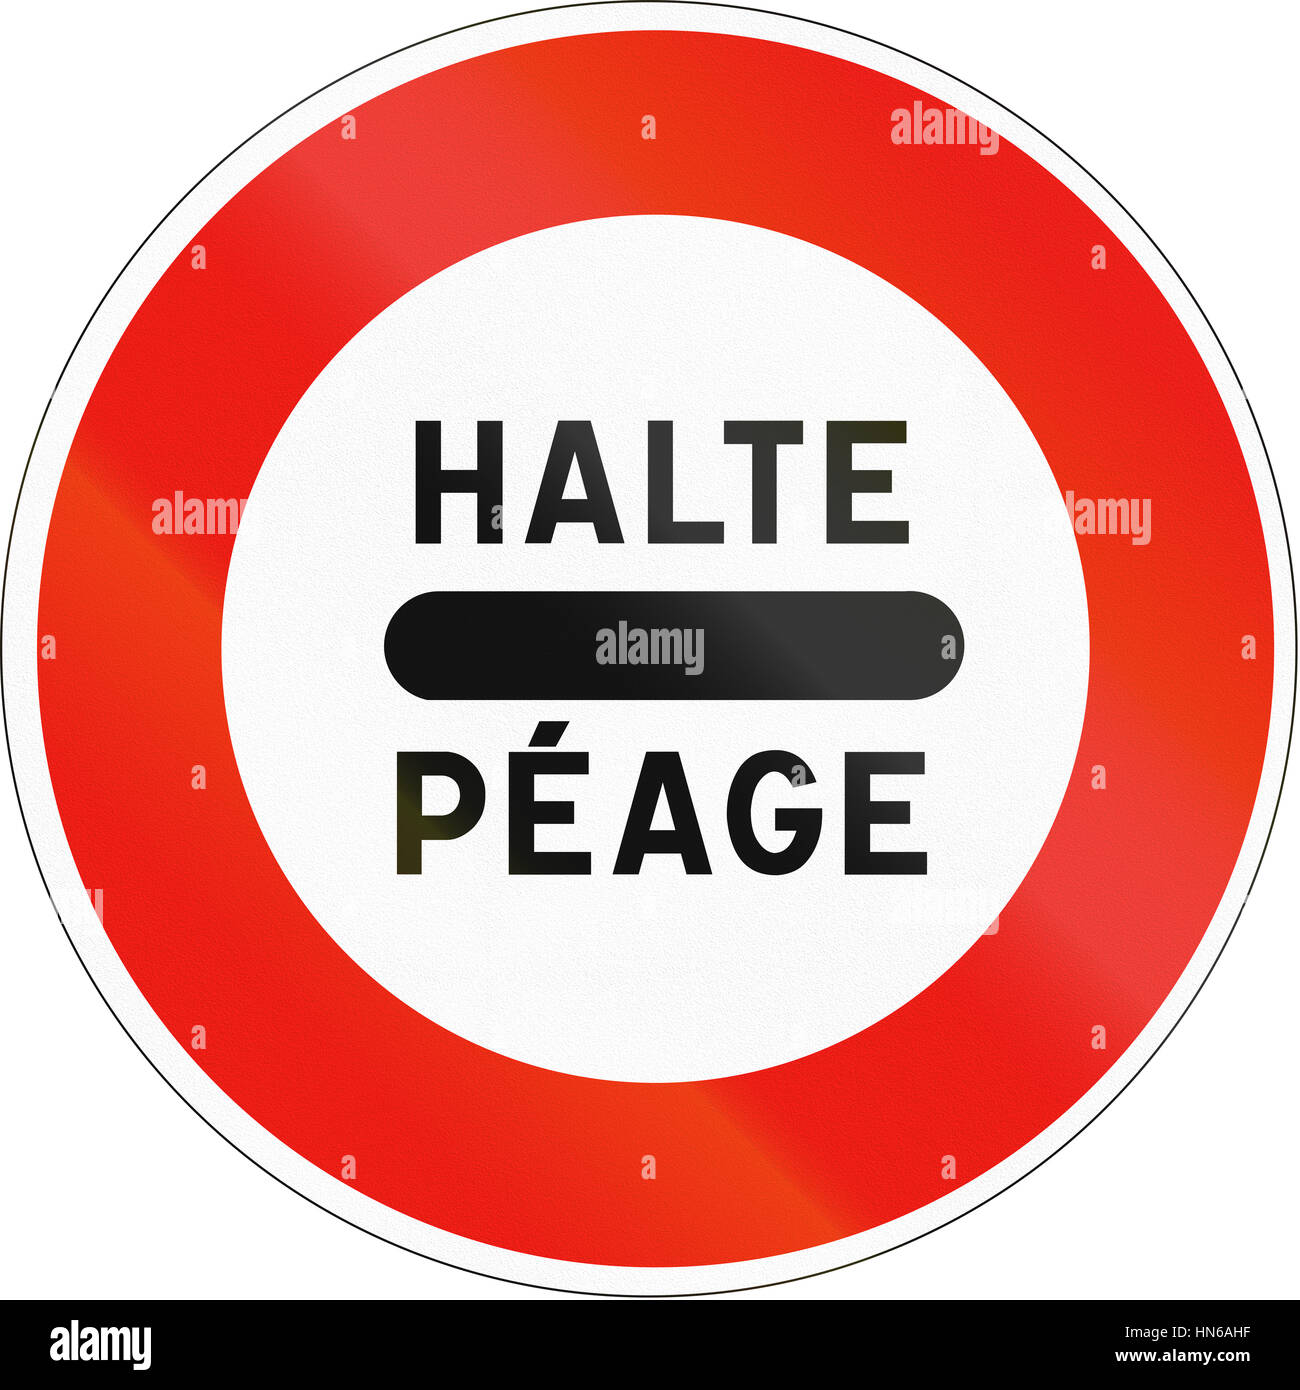 French regulatory road sign - Tollbooth. Halte means stop, peage means toll. Stock Photo